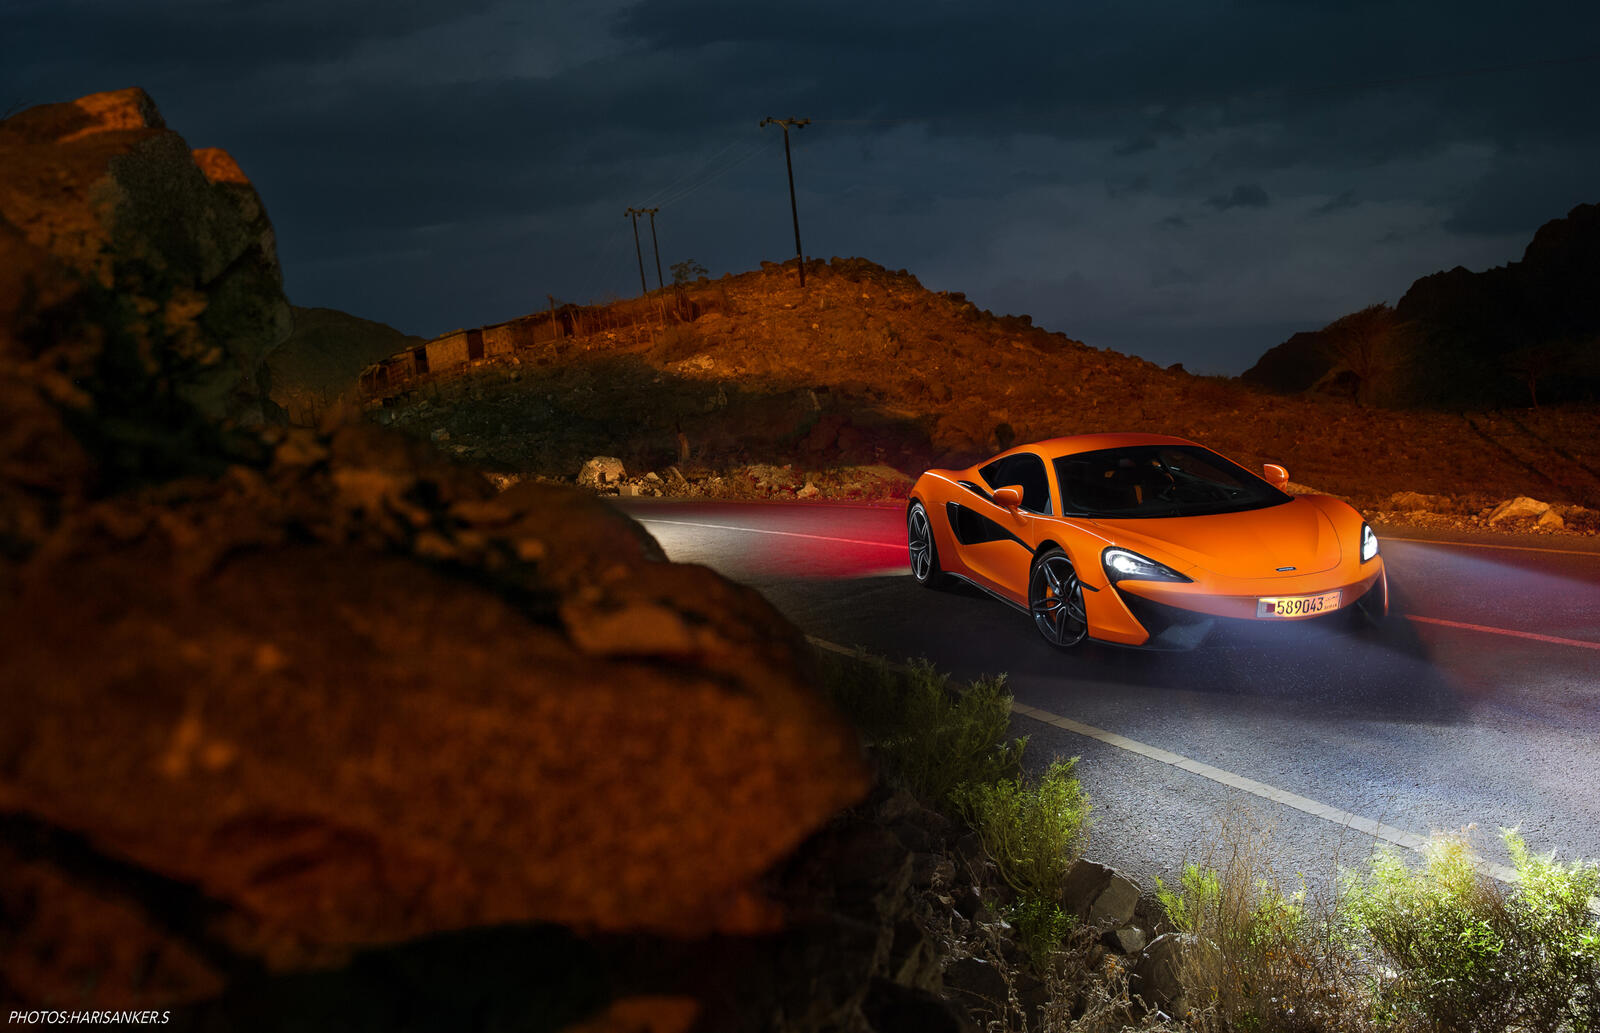 Free photo An orange-colored Mclaren on the road at night.